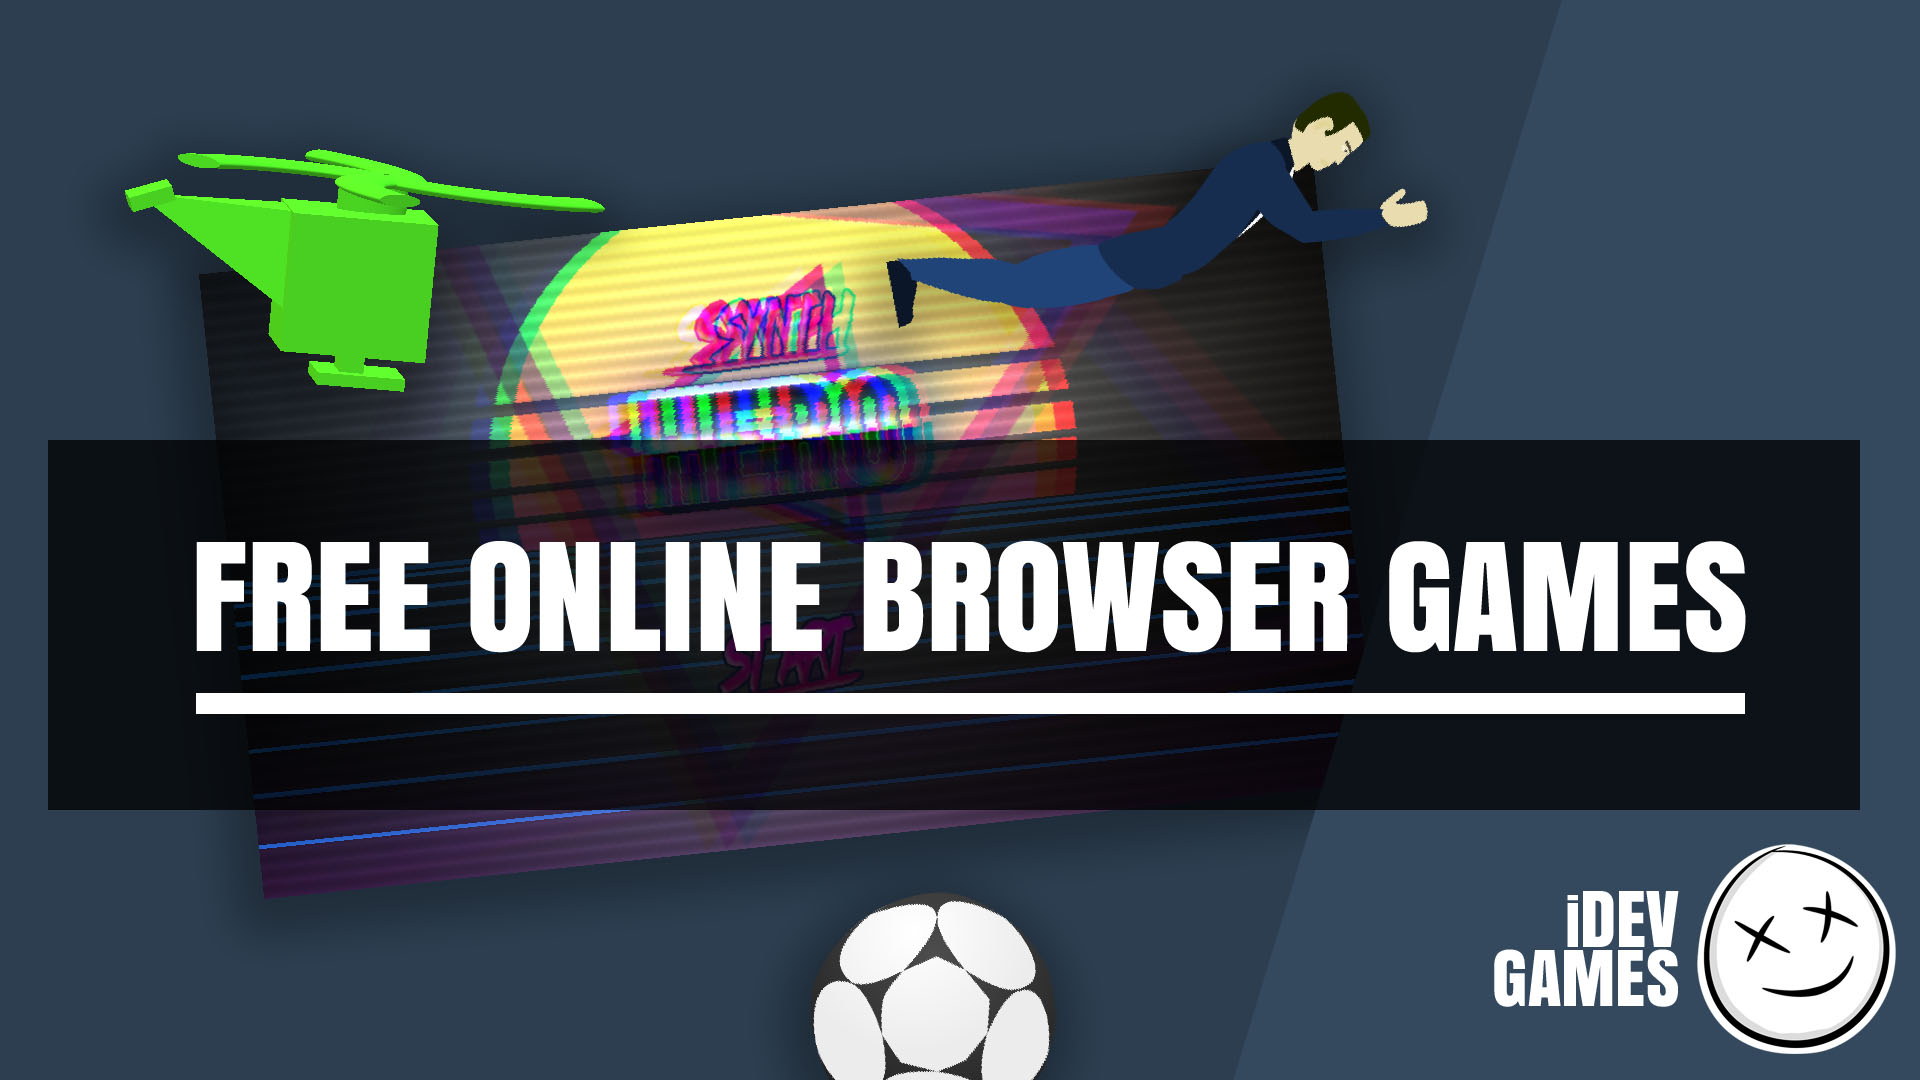 Free online browser games